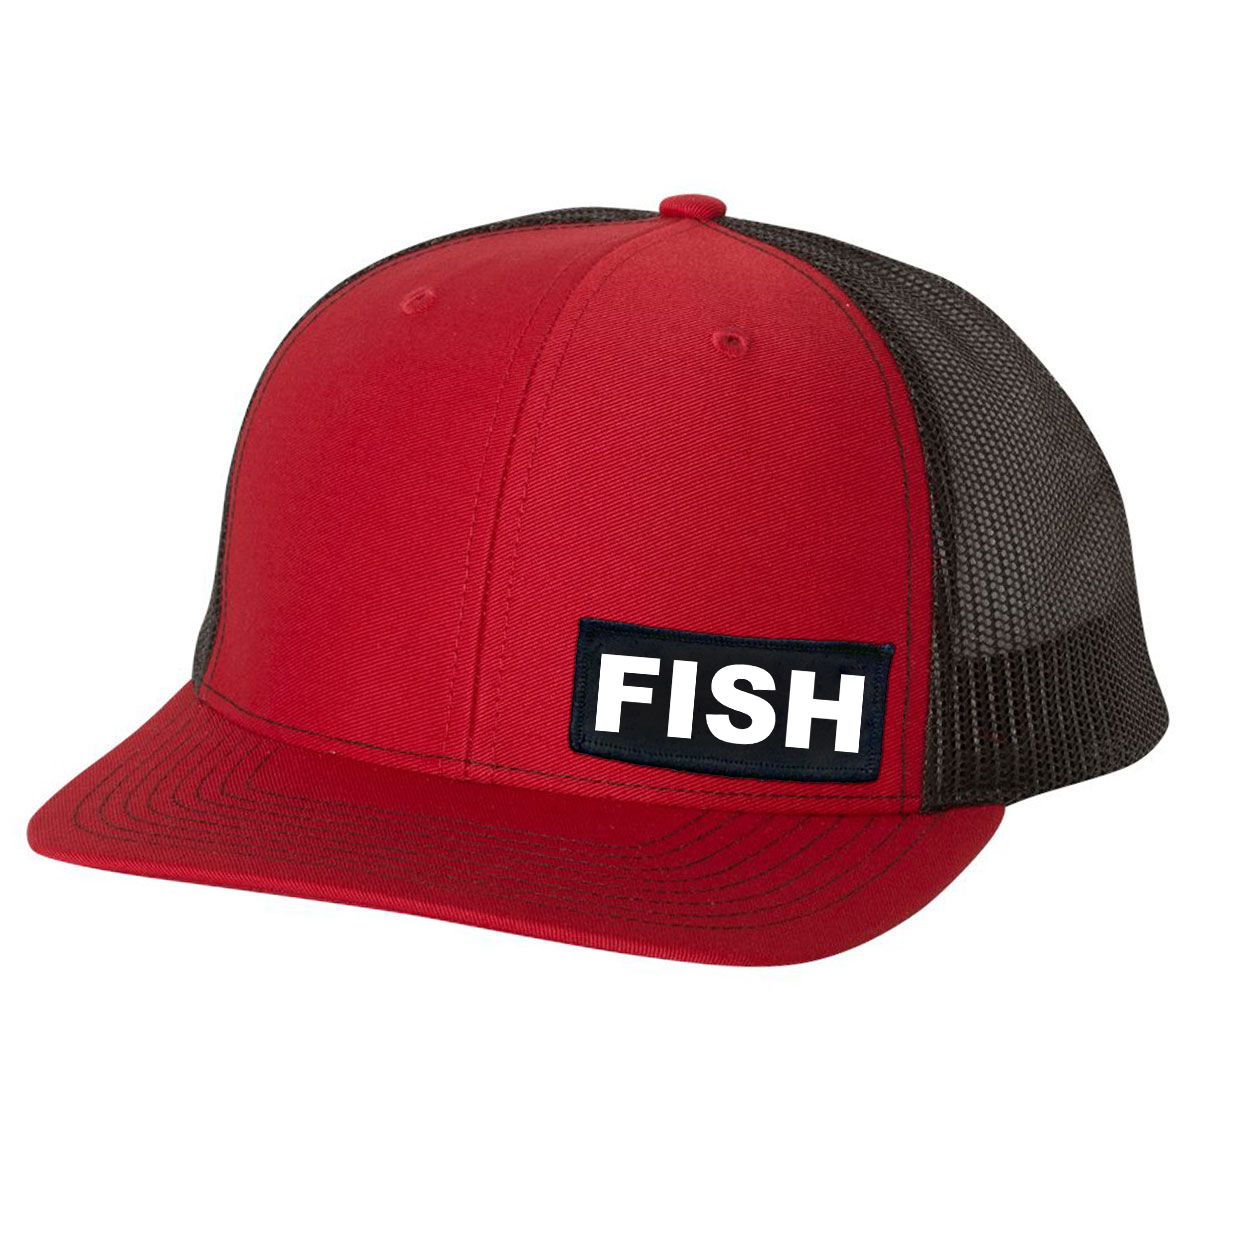 Fish Brand Logo Night Out Woven Patch Snapback Trucker Hat Red/Black 